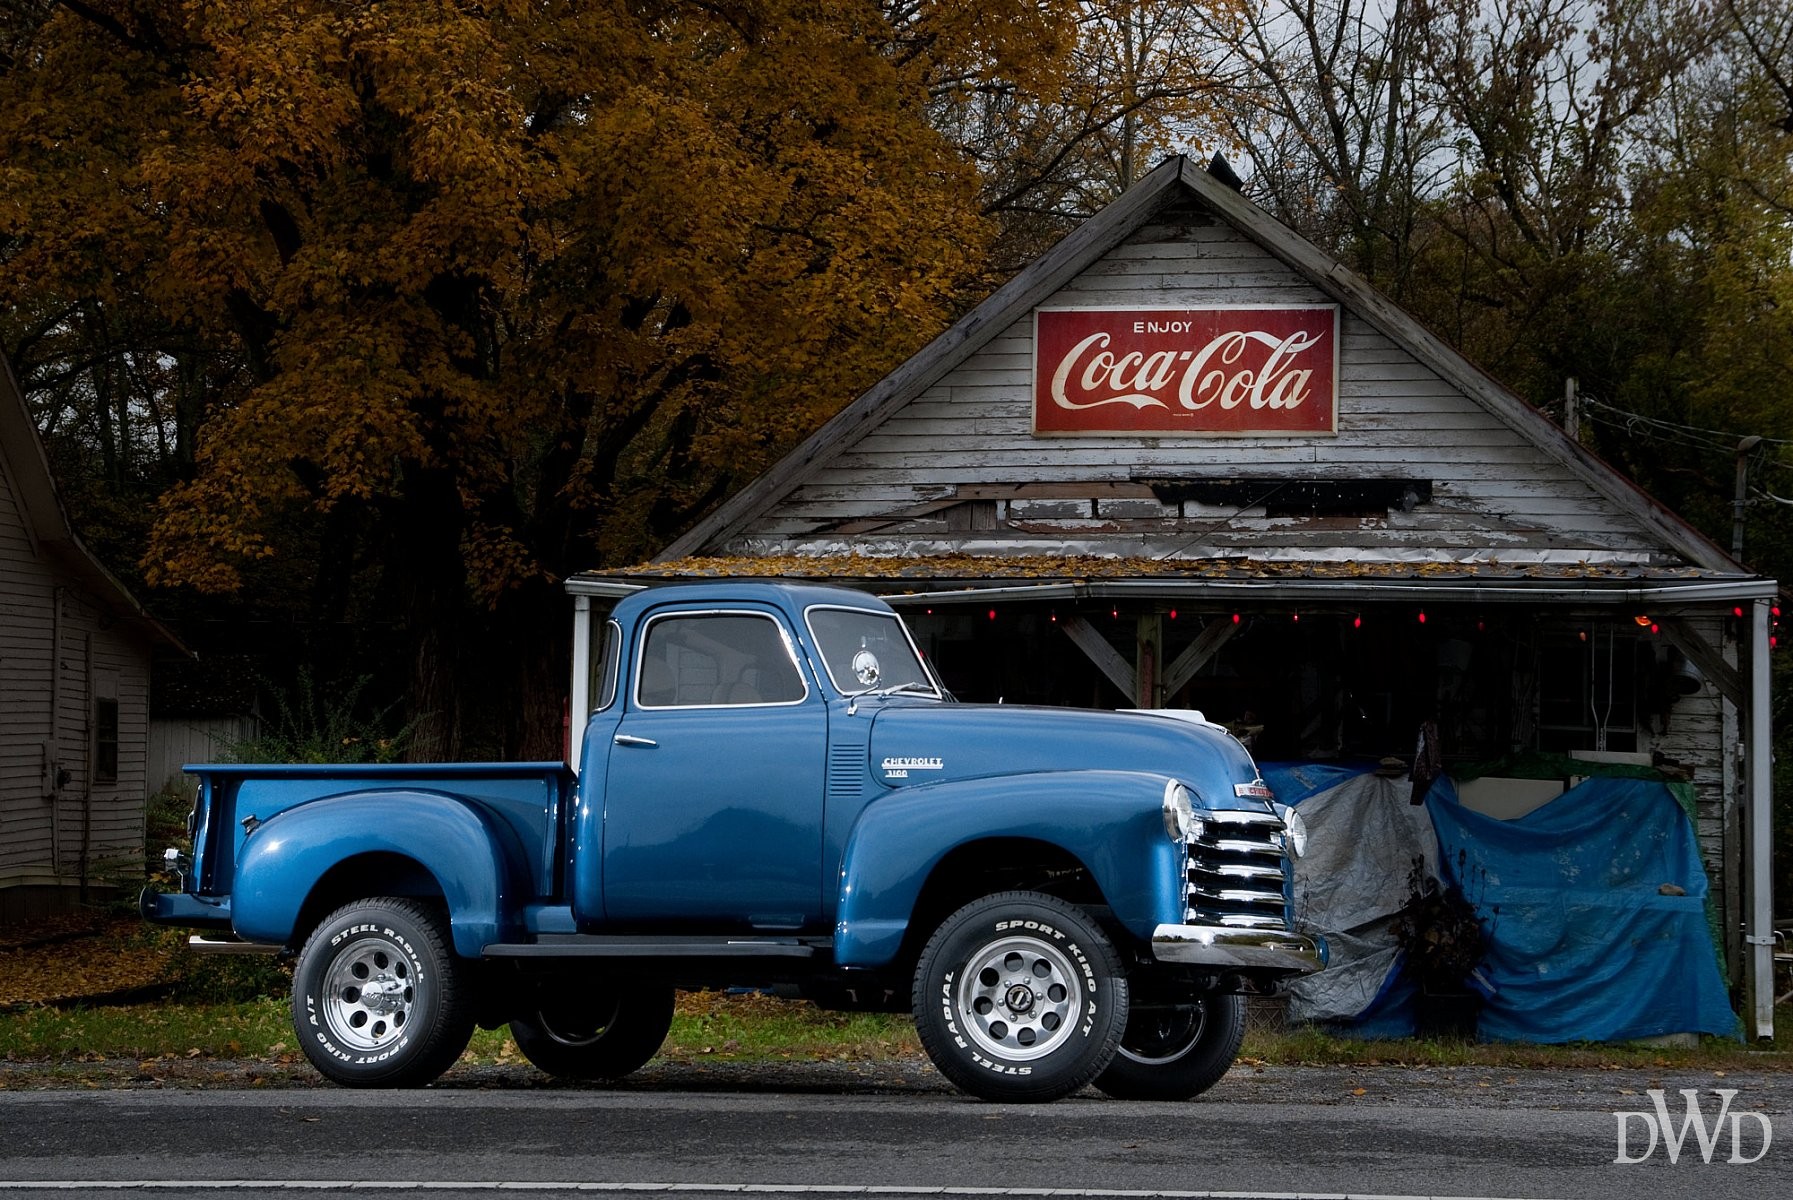 Enjoy The Classics | 1950 Chevy Truck and CocaCola